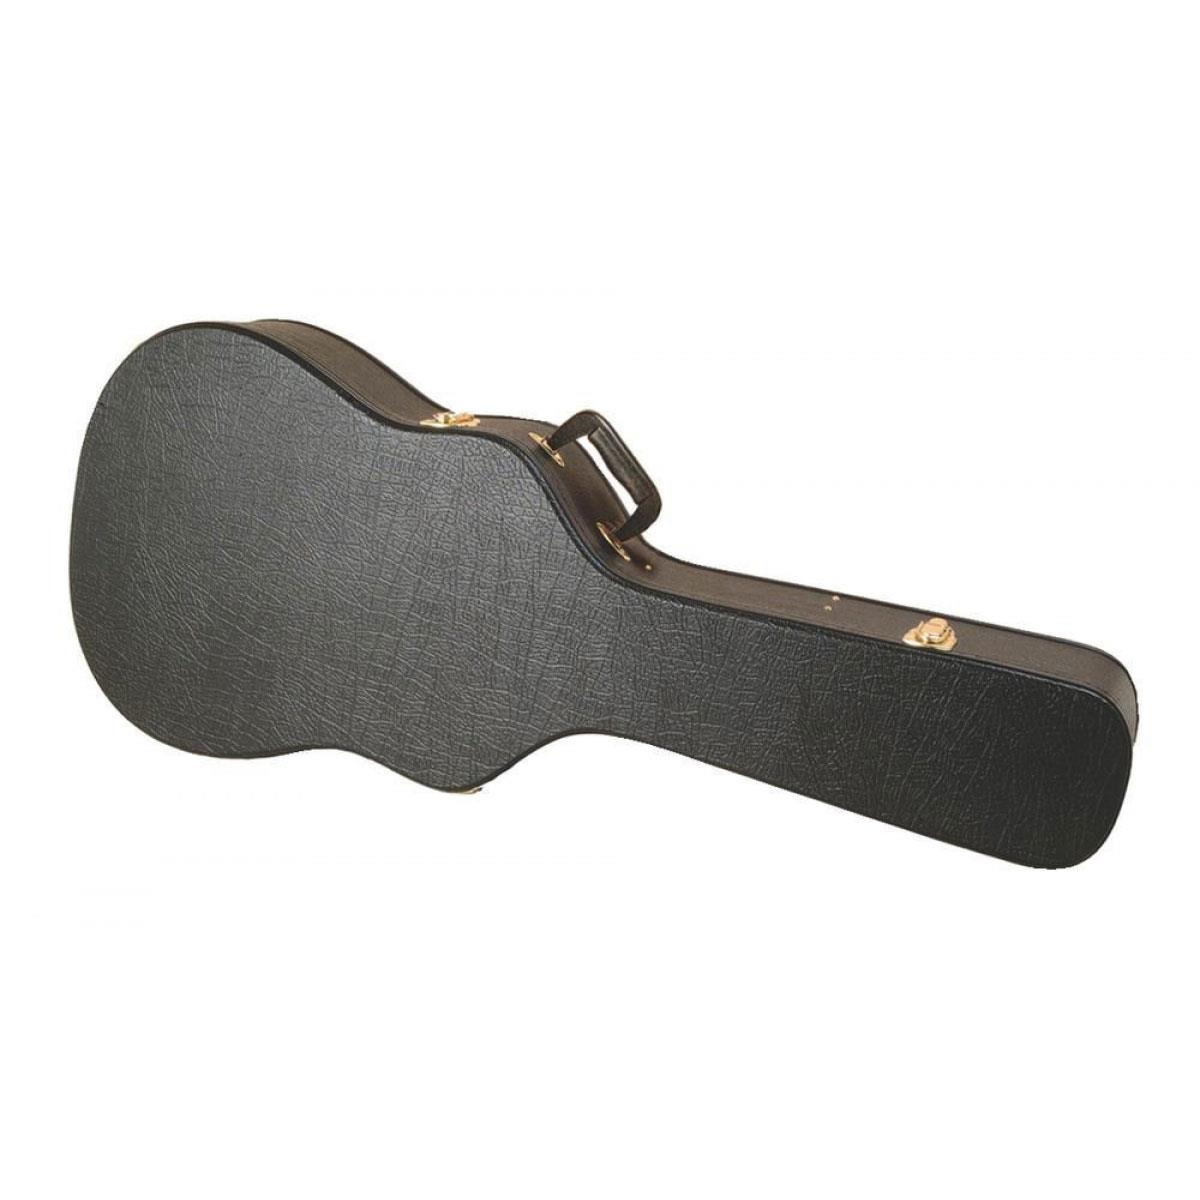 Image of On-Stage Acoustic Guitar Case for 12-String Guitars